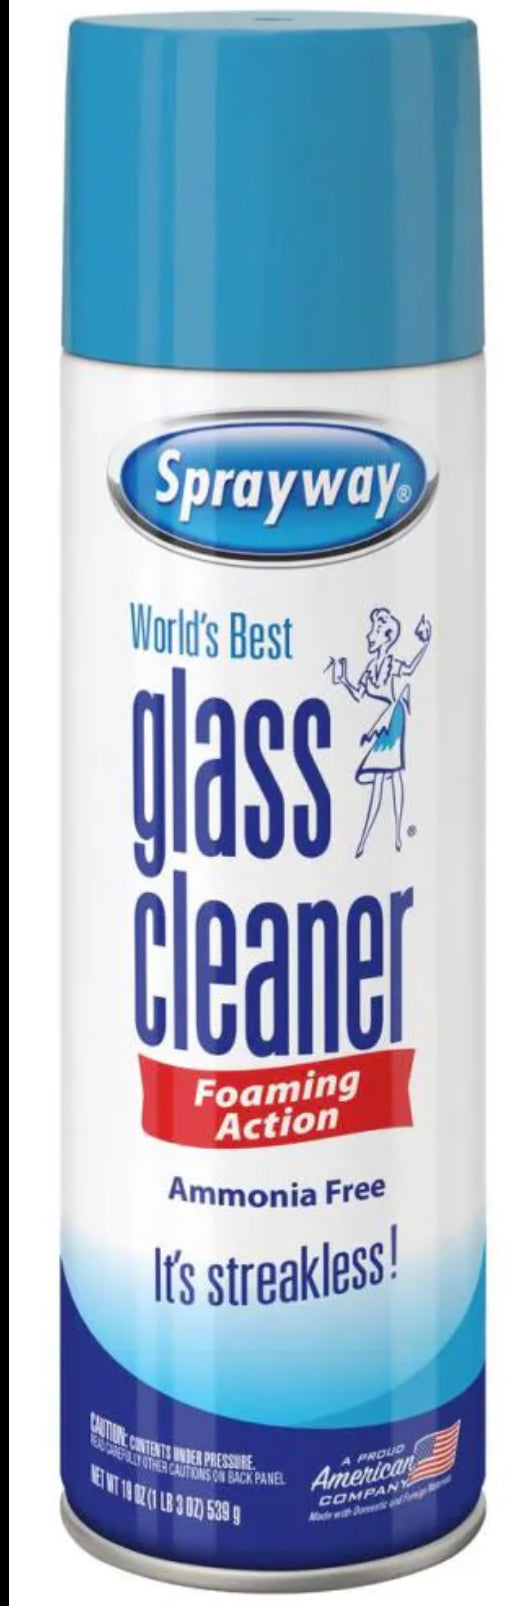 SprayWay Glass Cleaner for Paint Work